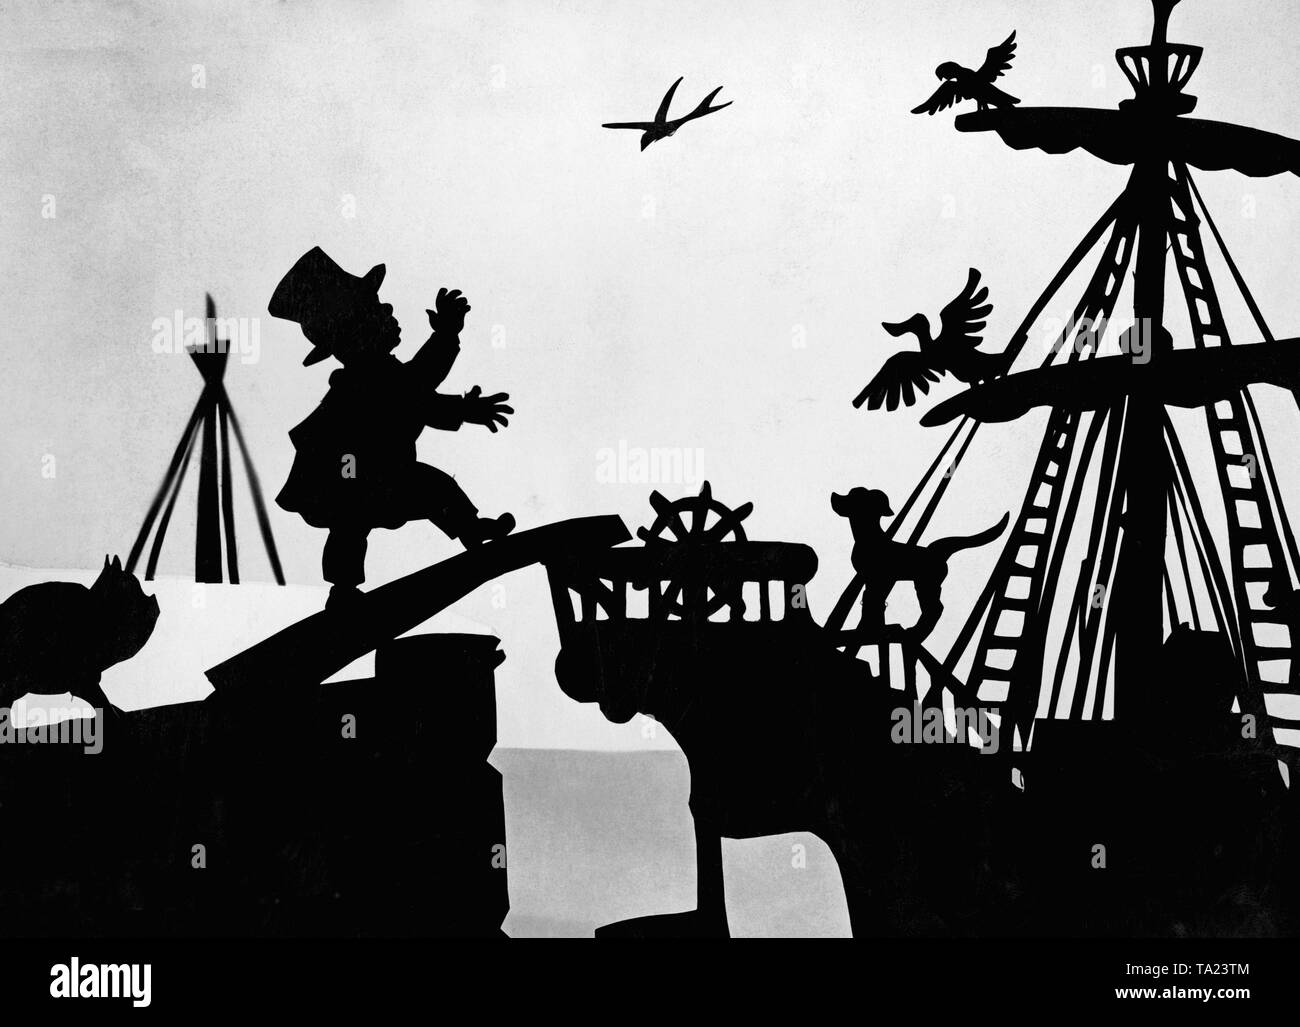 This photo shows a scene from the silhouette film 'Dr. Dolittle and His Animals' - subtitle: 'The Trip to Africa' by Charlotte Reiniger. The silhouette film, also known as silhouette animation, is a technique of animated film in which silhouettes are put together on a lighted glass plate in front of a white or black background to form a film. The result is the silhouette film, inspired by shadow theater and the pictorial techniques of silhouette cutting. Stock Photo